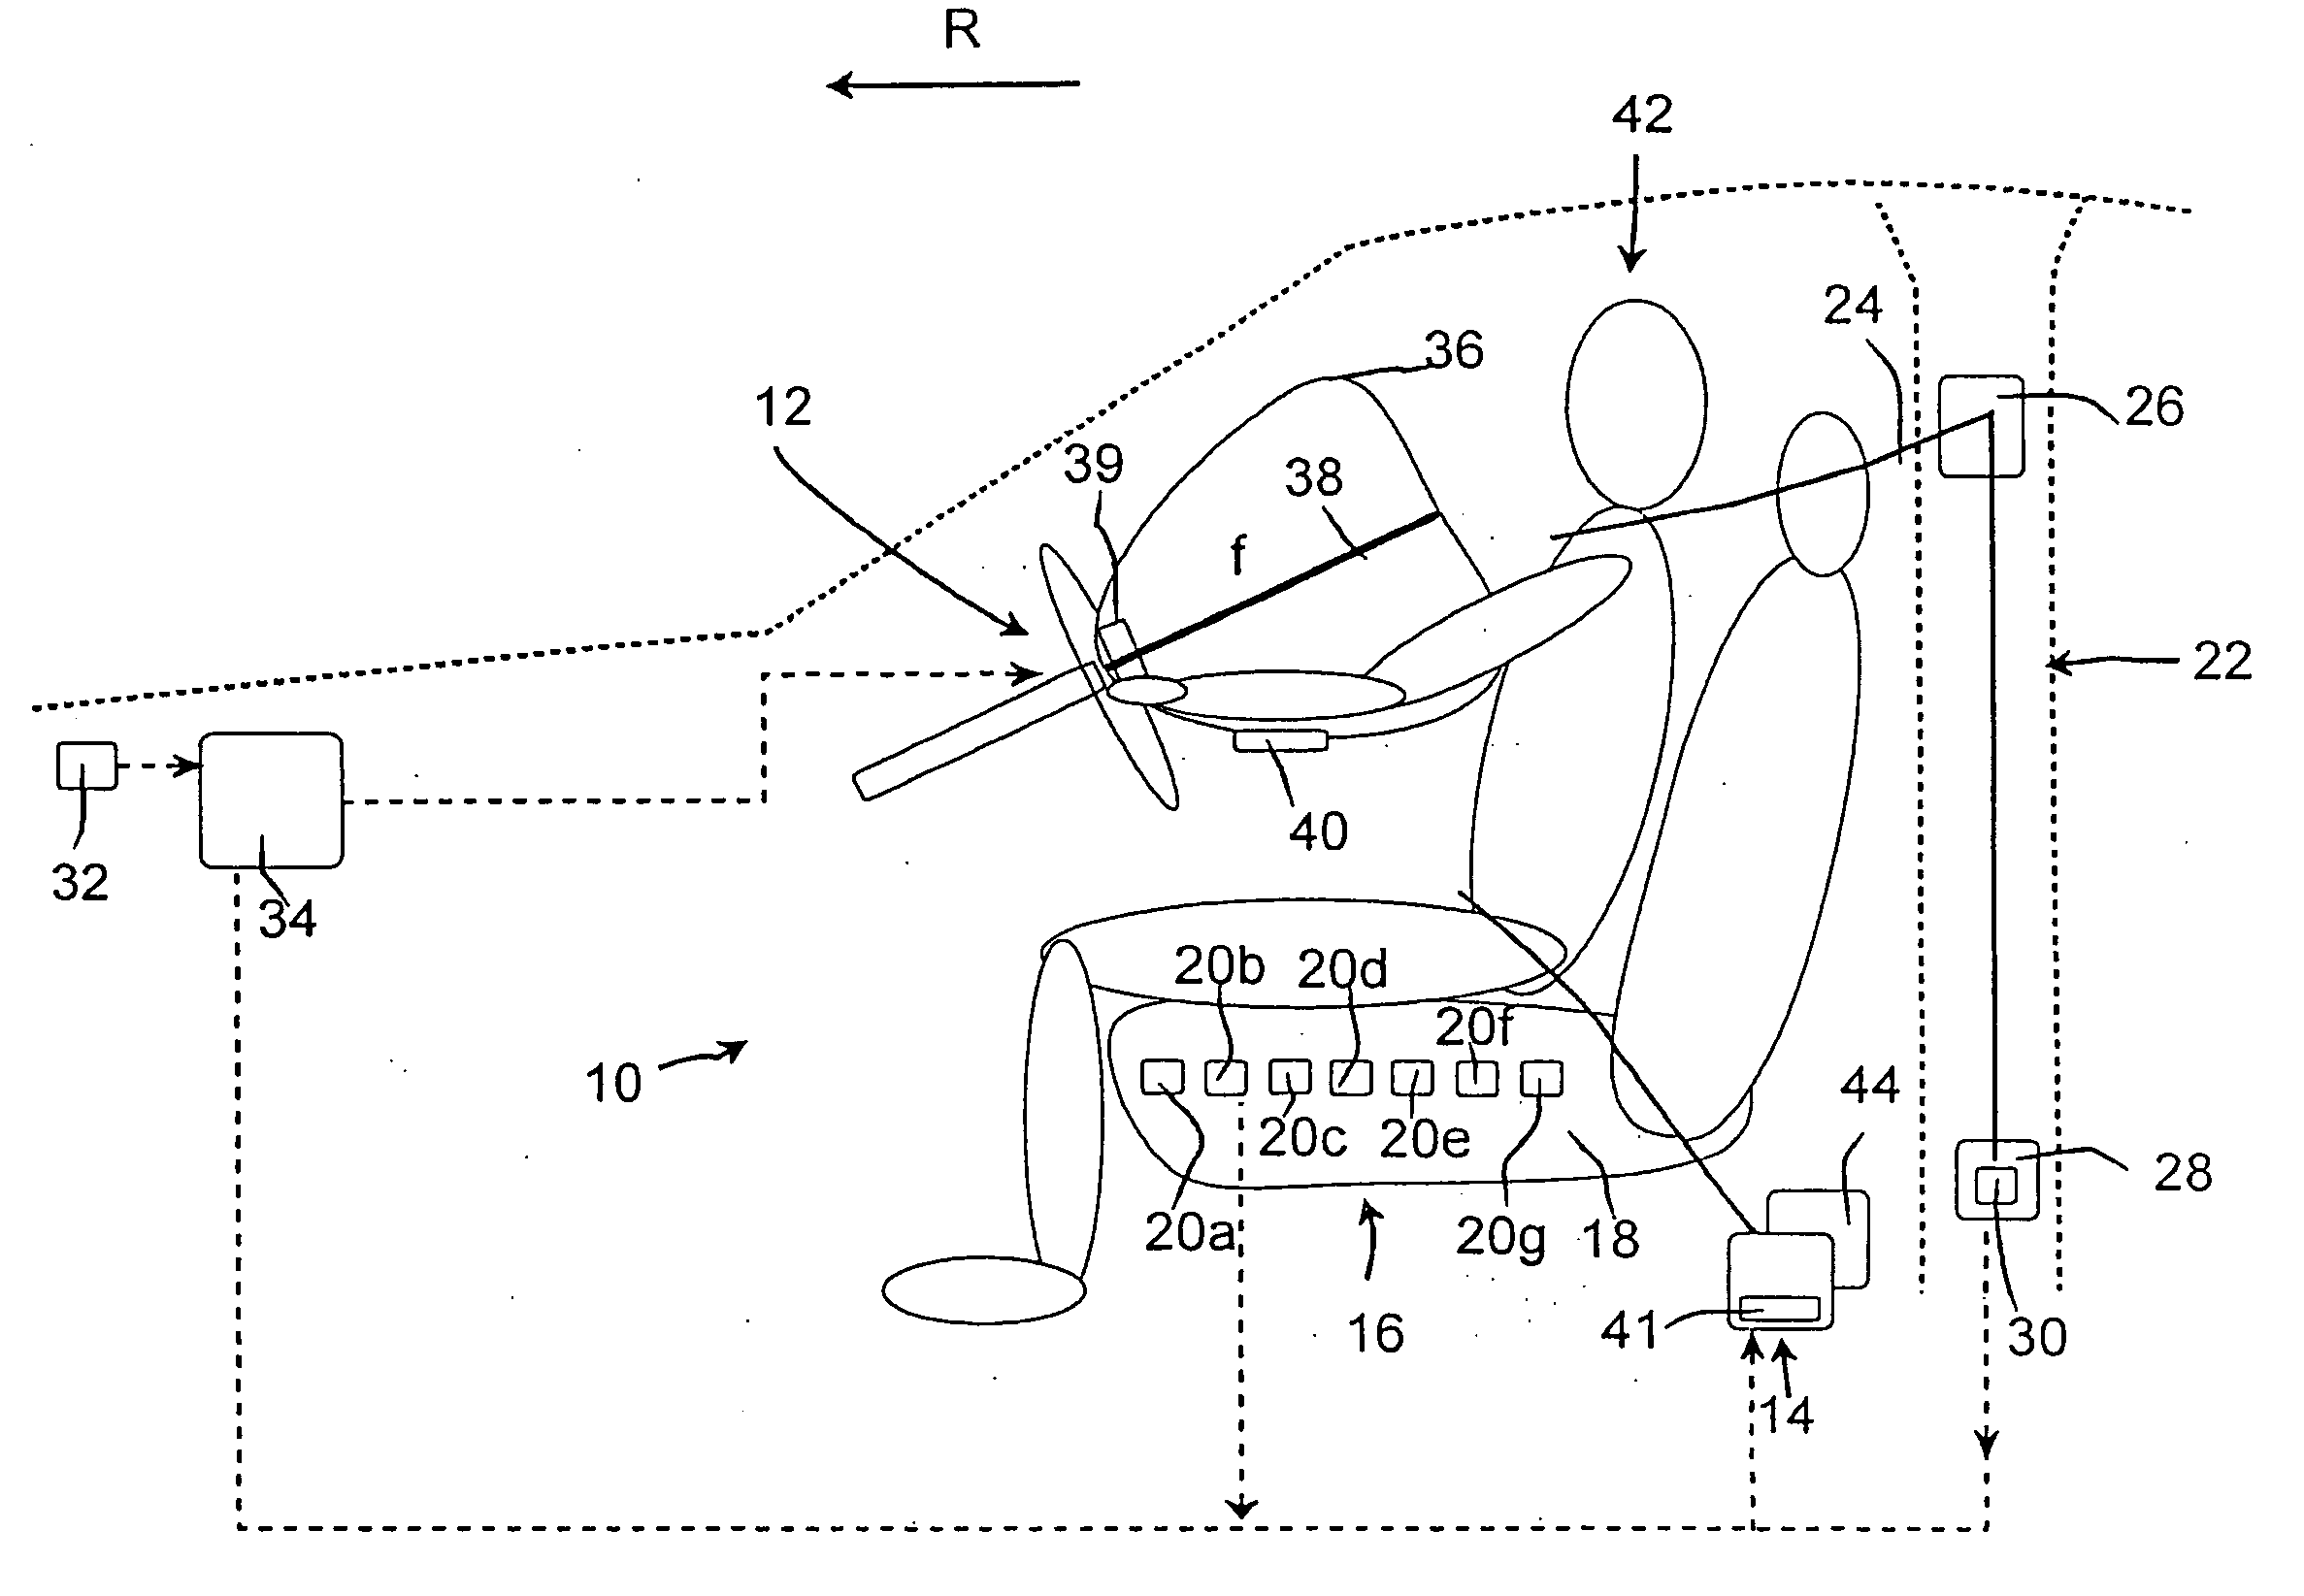 Vehicle occupant safety system and method for detecting the position of a vehicle occupant